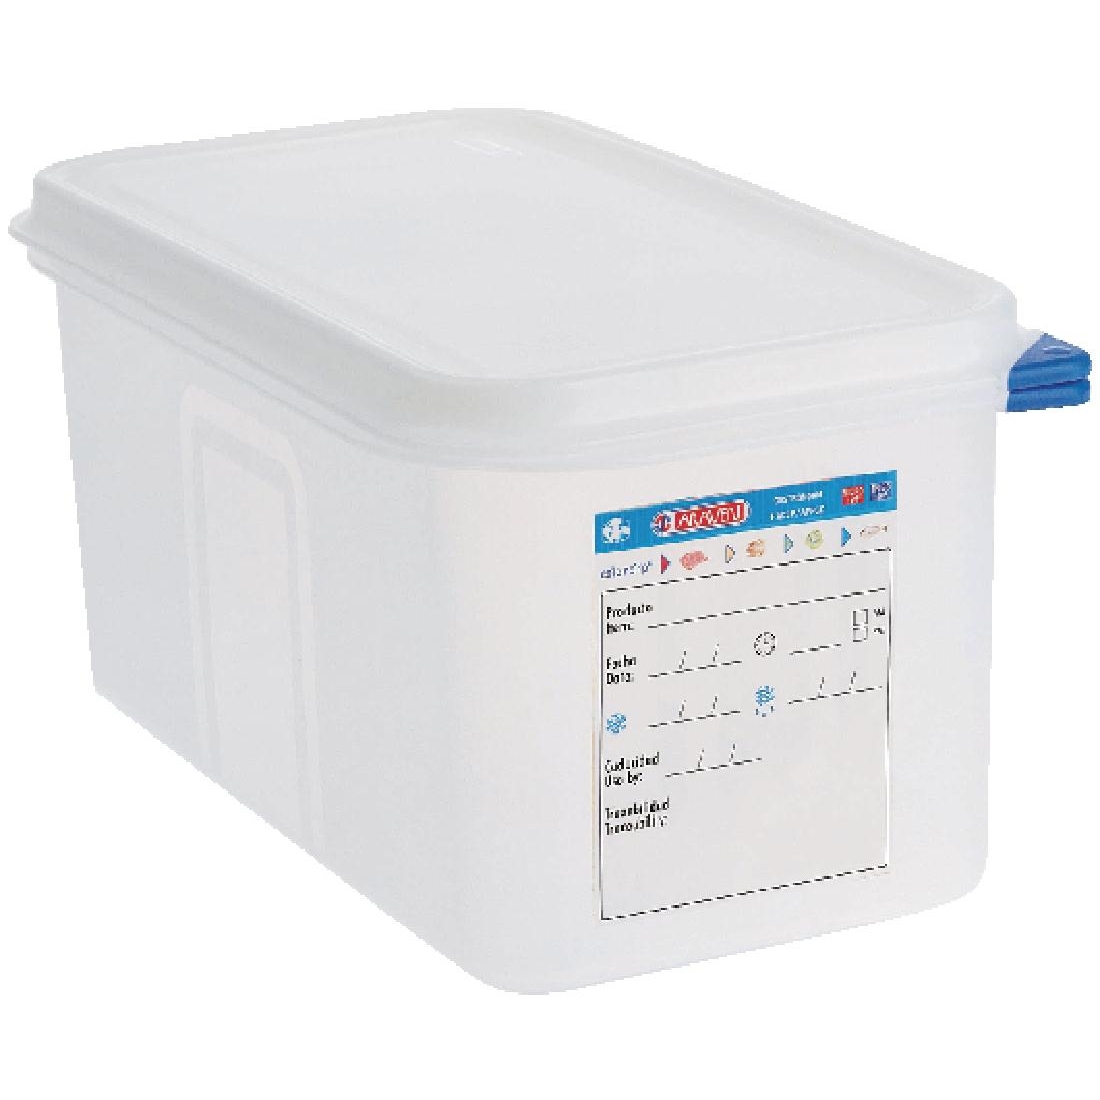 Araven 1/3 GN Food Container 6Ltr